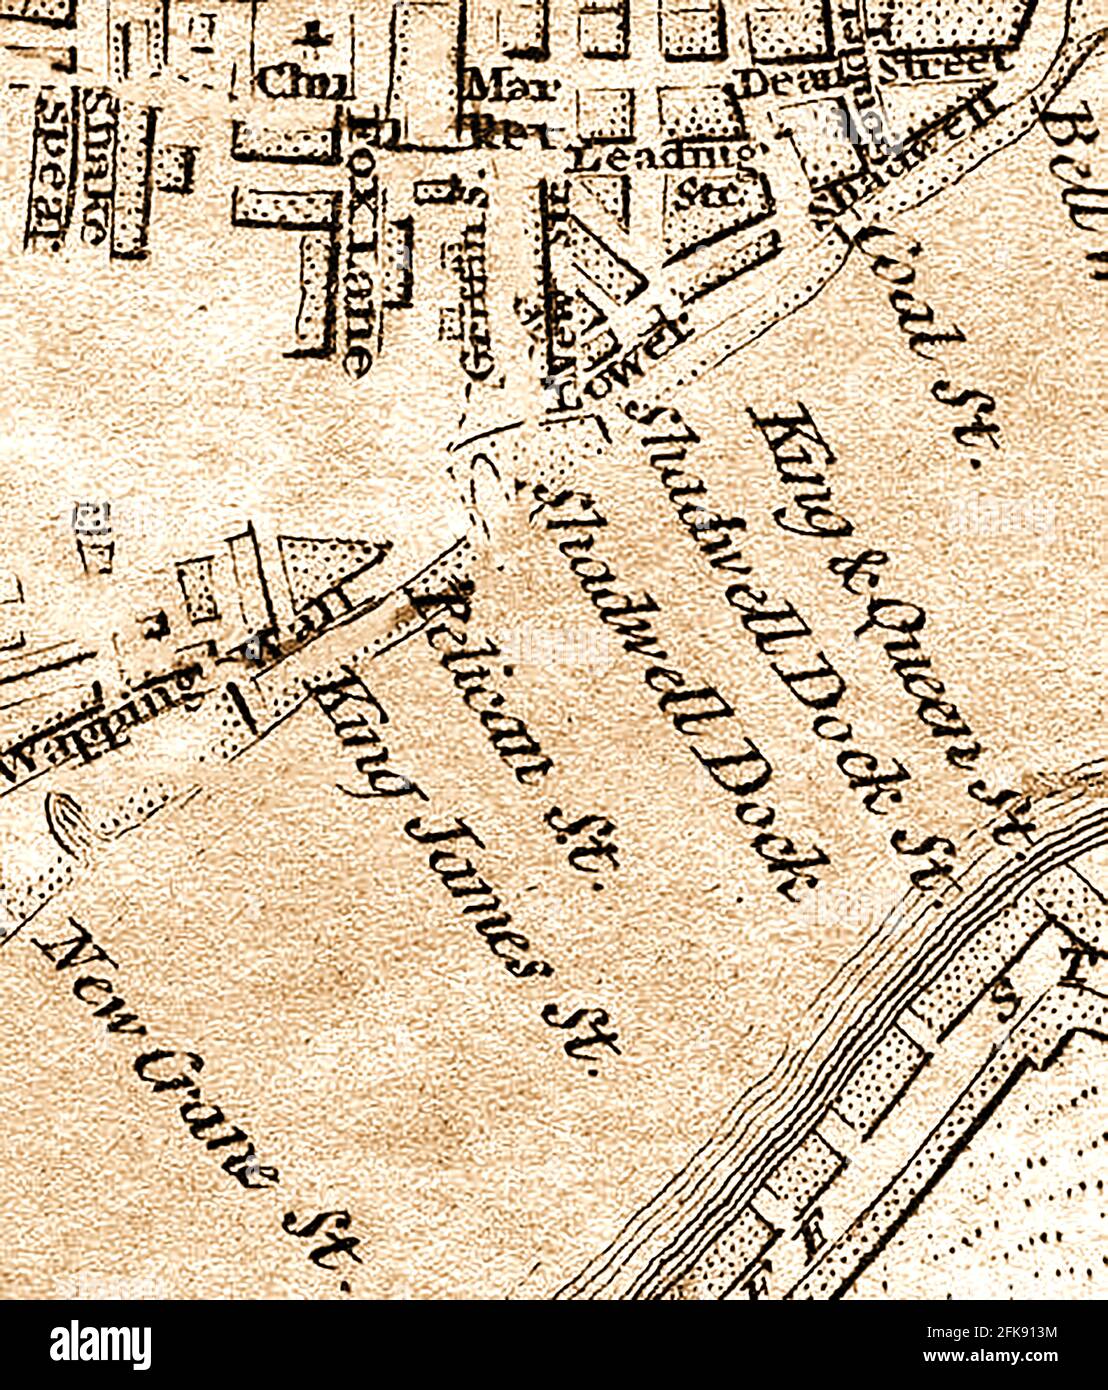 An extract from a very early 1800s map of the streets of Wapping Wall and lower Shadwell  overlooking the river Thames,London England including Shakespeare street or lane, Fox lane, Dean street, King James Street,Coal street, King and Queen Street, Shadwell dock, Pelican Street, New Crane Street, Grfiffin Street. The name Shadwell is believed to bederived from St Chad's Well. Stock Photo